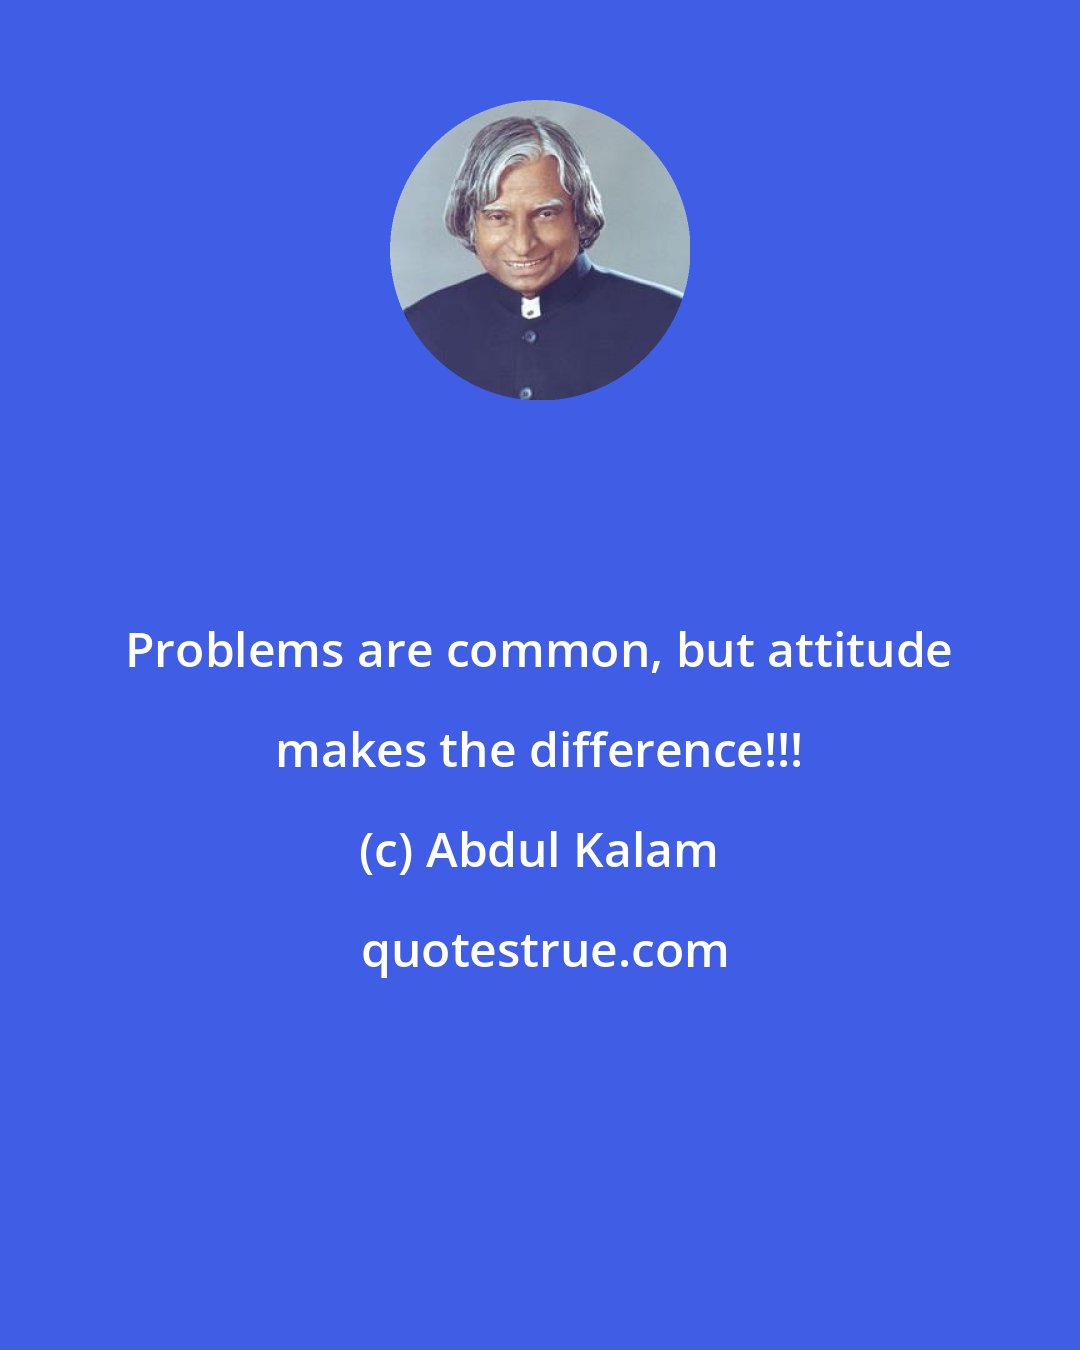 Abdul Kalam: Problems are common, but attitude makes the difference!!!